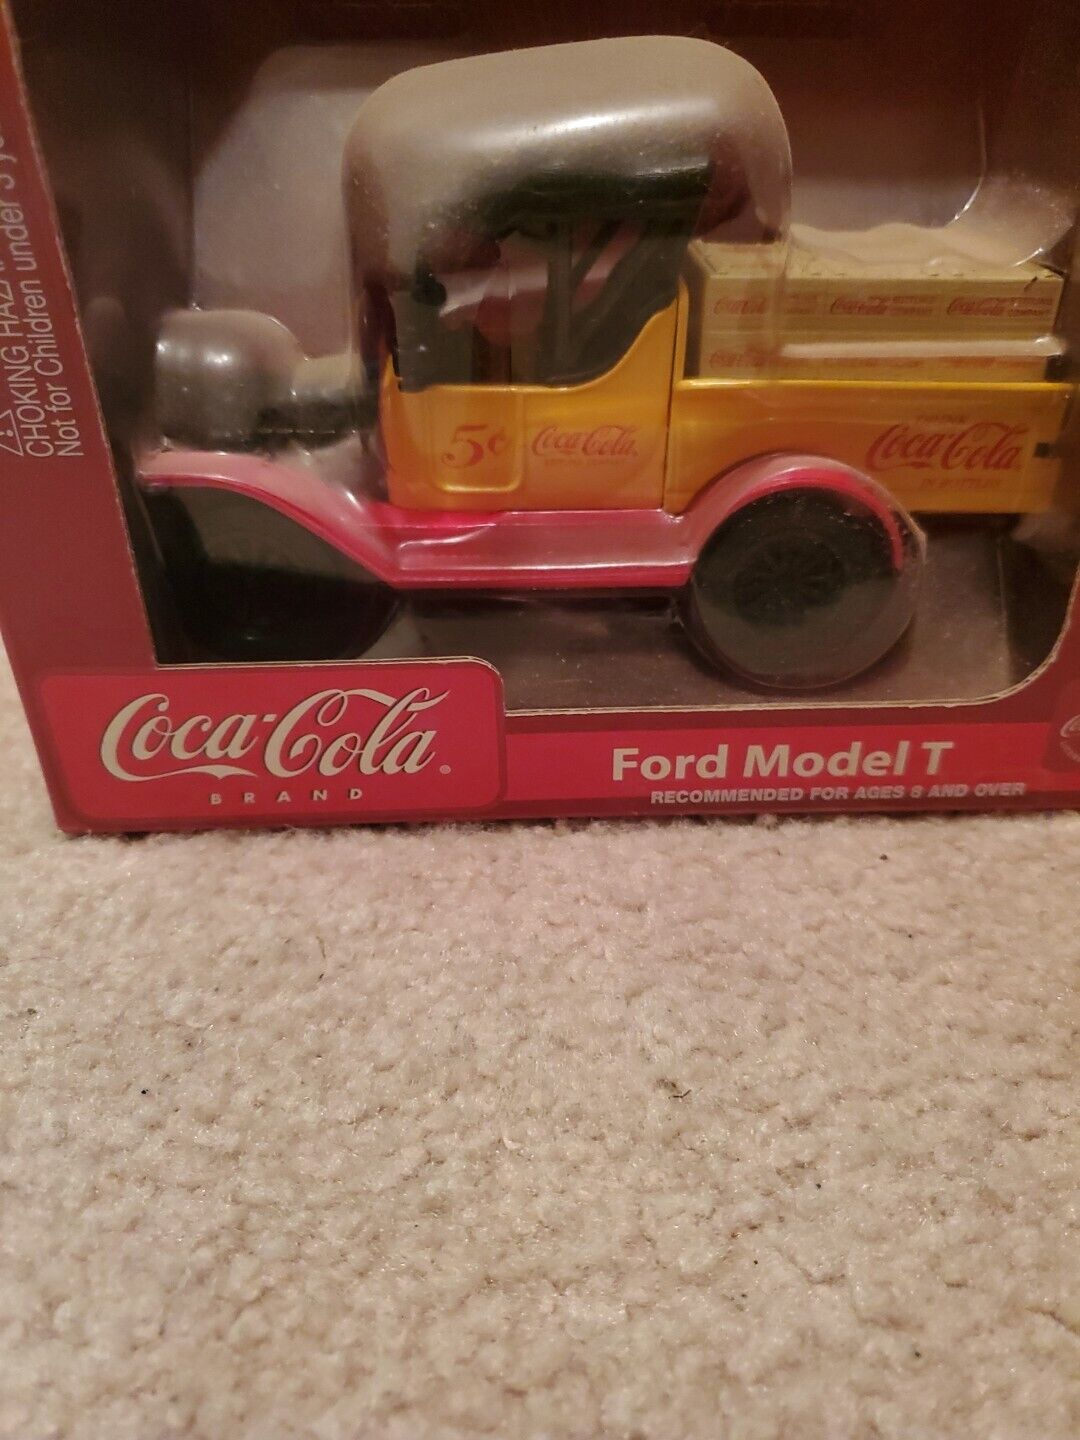 New Gearbox Coca Cola Ford Model T Delivery Truck Bank